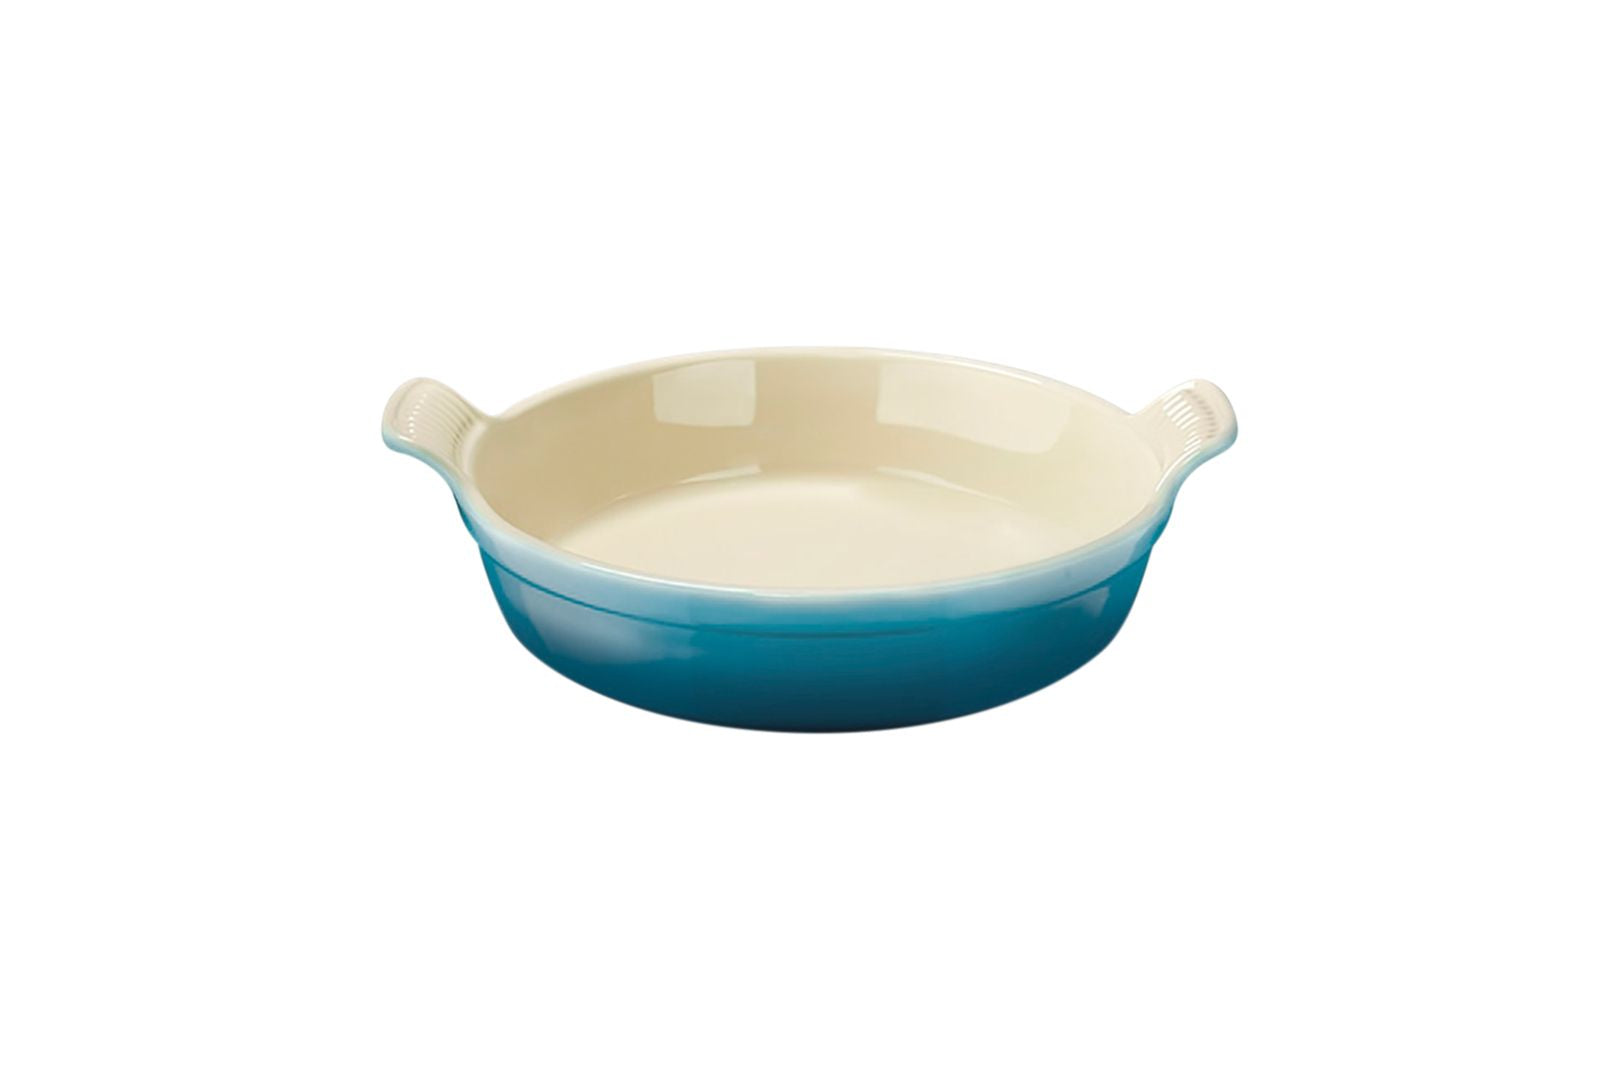 Le Creuset Round Traditional Casserole Dish 24 Cm, Deep Teal